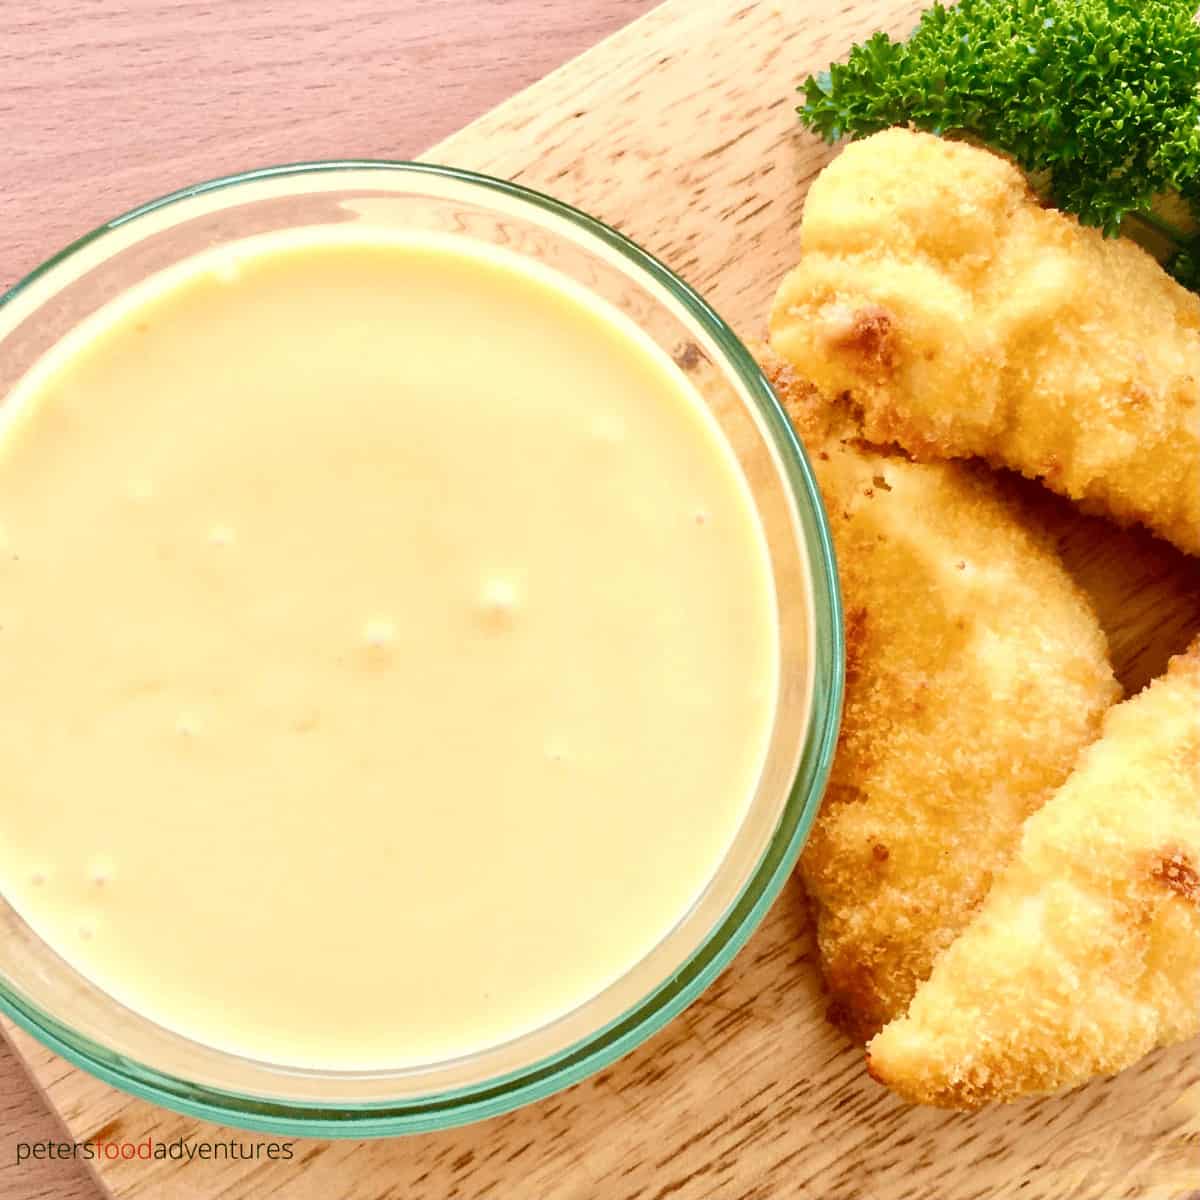 How to make Honey Mustard Sauce, so tasty I could drink this stuff! A delicious homemade Creamy Honey Mustard recipe made with mayo, honey, mustard, sour cream, with a pinch of onion and garlic powder!